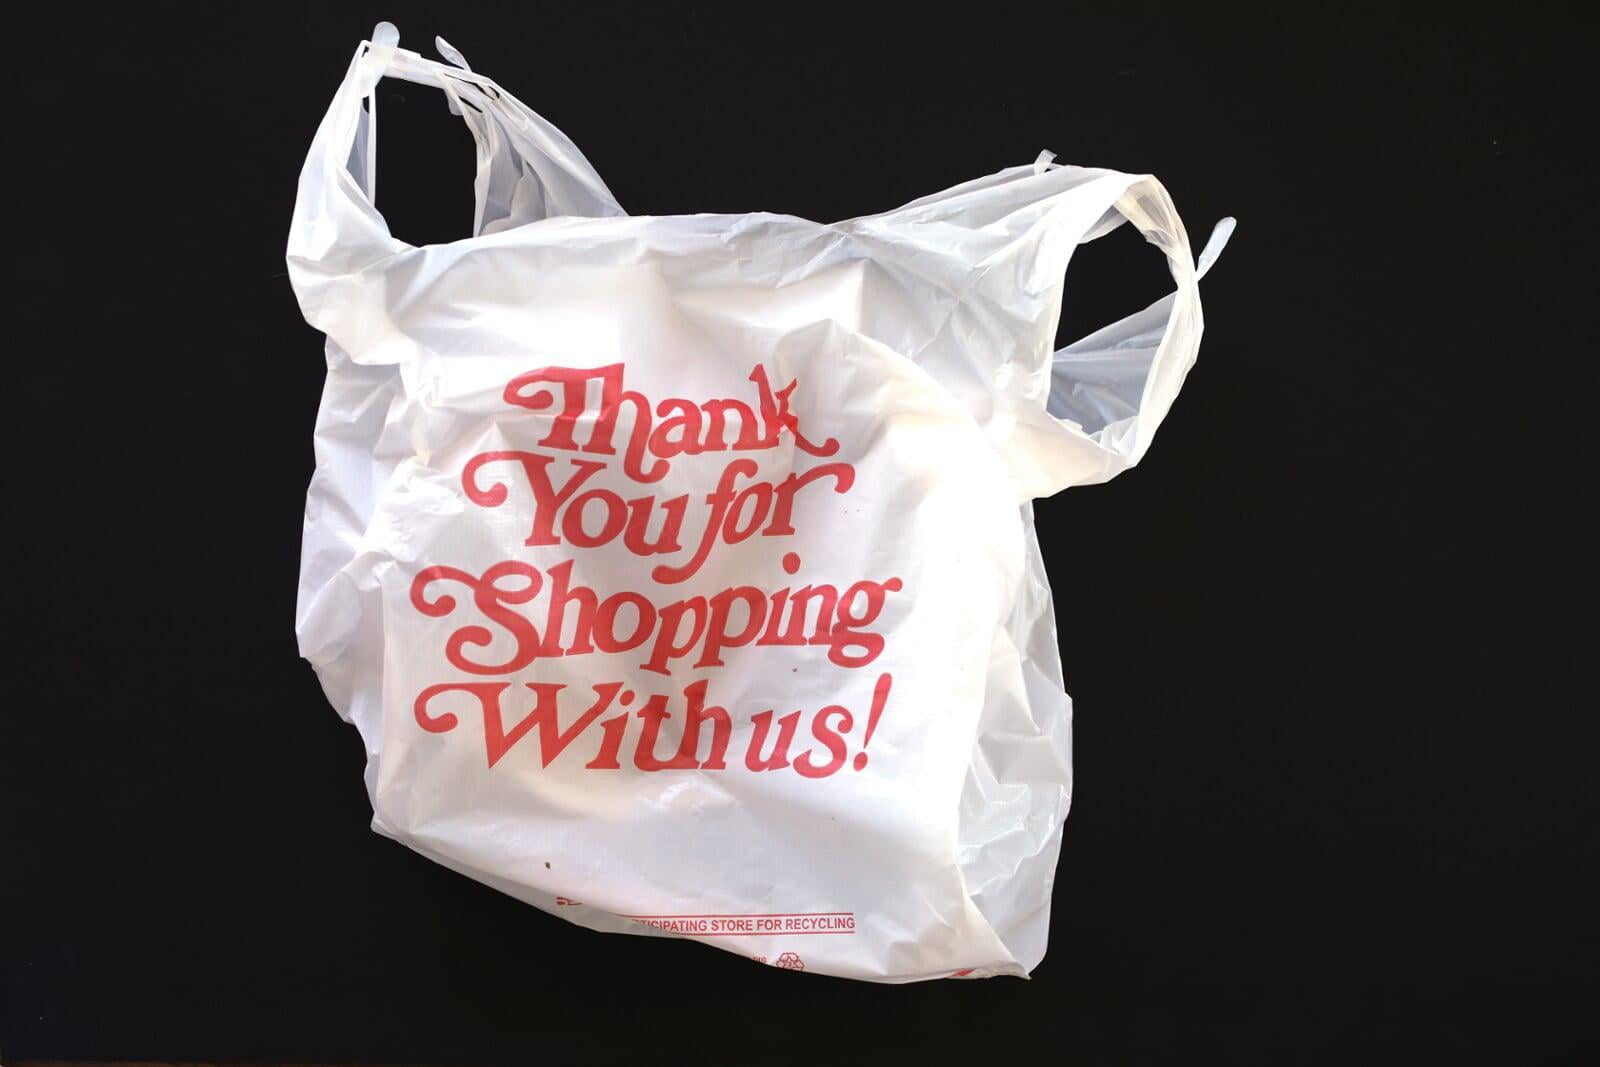 Shink Tries Repealing Nearly 7-Year-Old State Preemption Of Local Plastic Bag Bans